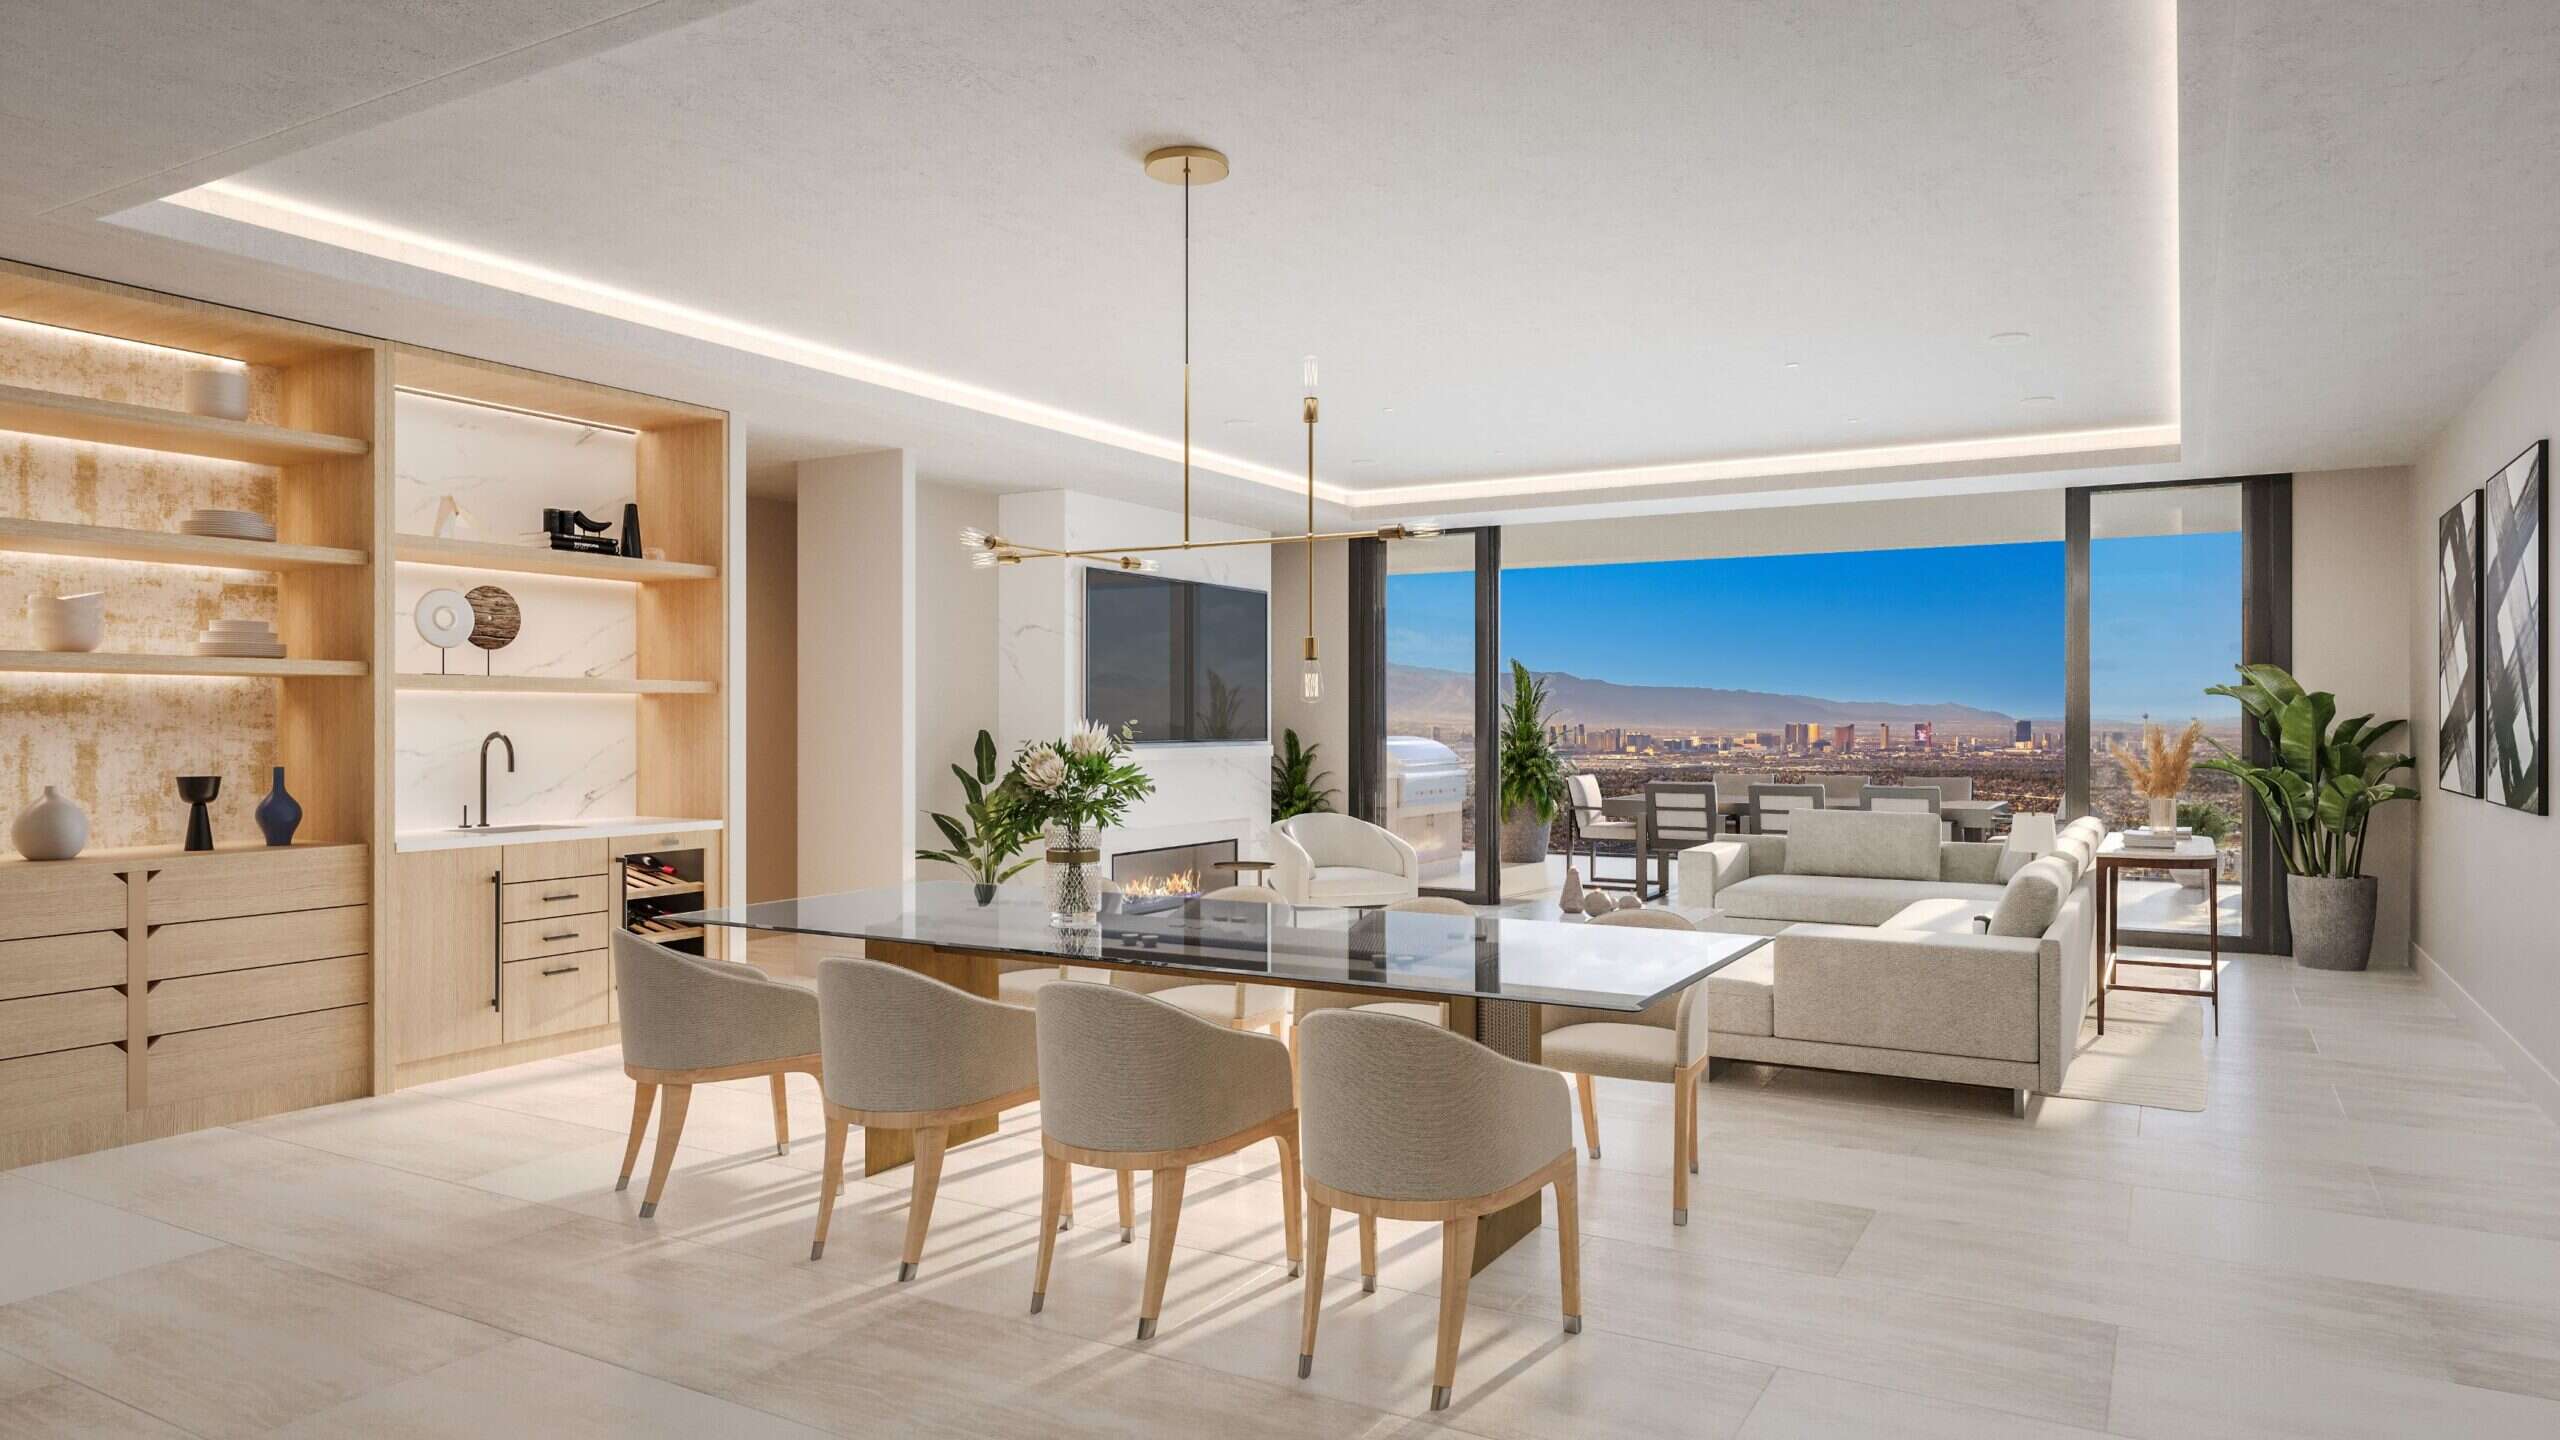 Views of Las Vegas from the residence living space